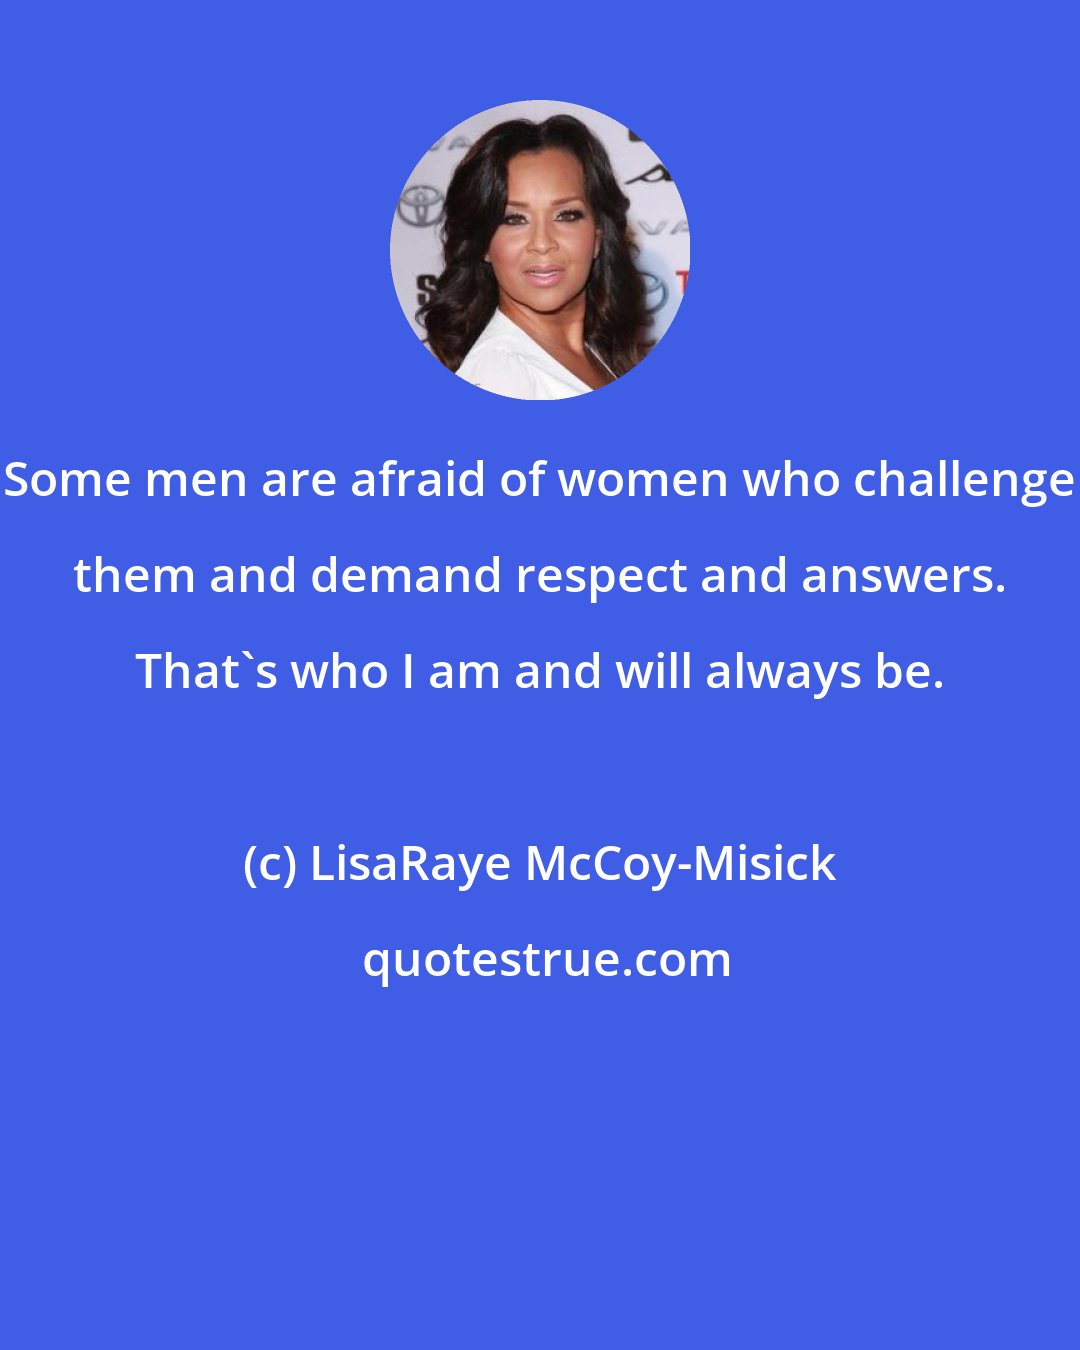 LisaRaye McCoy-Misick: Some men are afraid of women who challenge them and demand respect and answers. That's who I am and will always be.